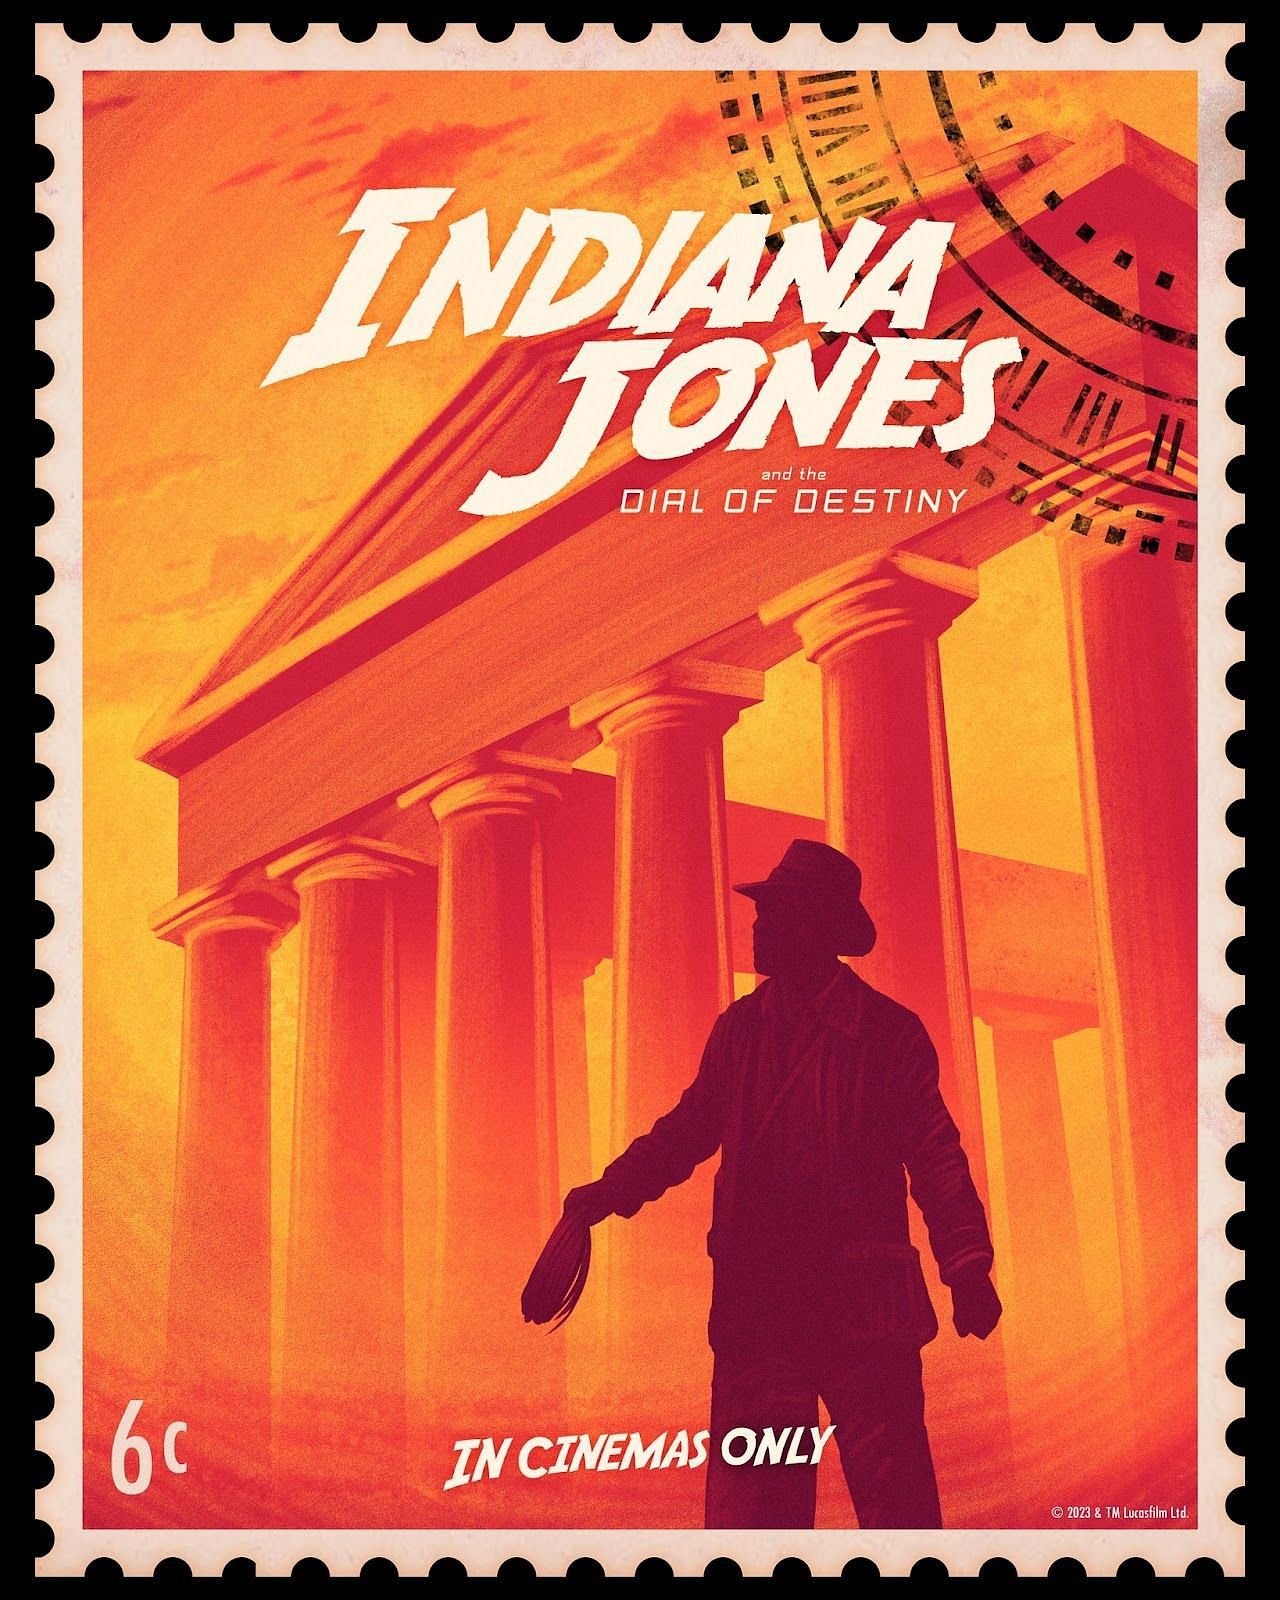 What is Indiana Jones and the Dial of Destiny about?